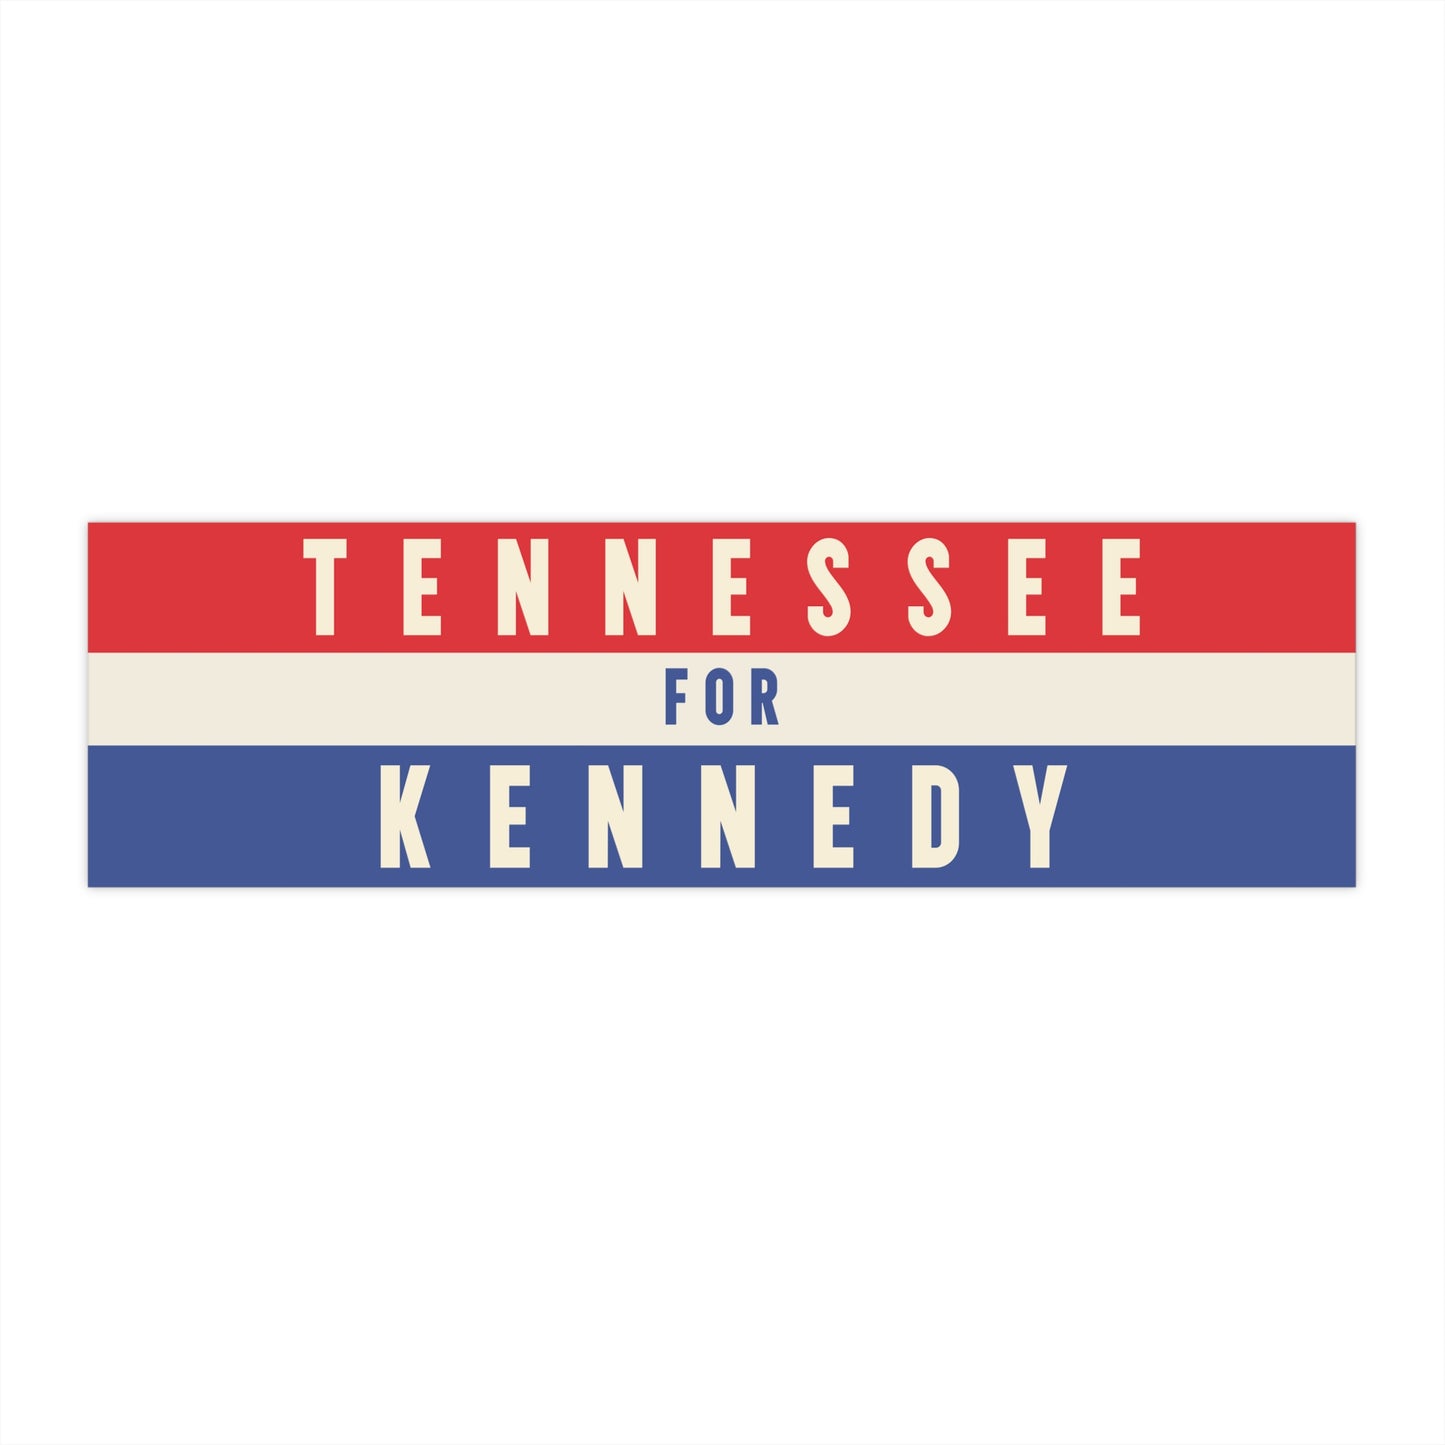 Tennessee for Kennedy Bumper Sticker